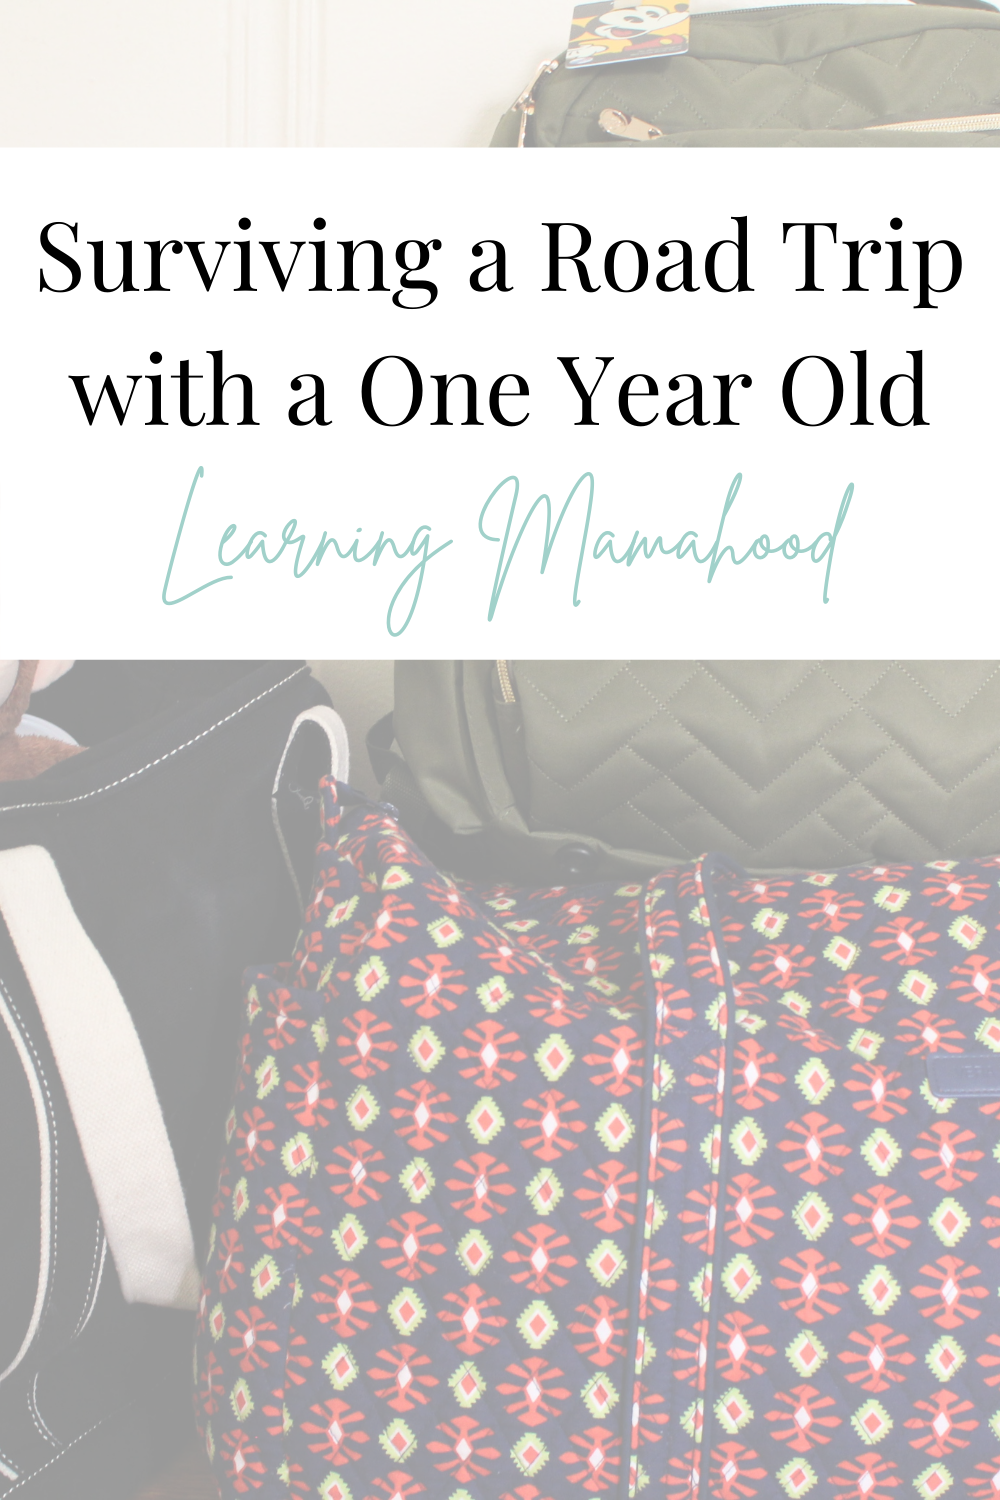 Surviving a Road Trip with a One Year Old